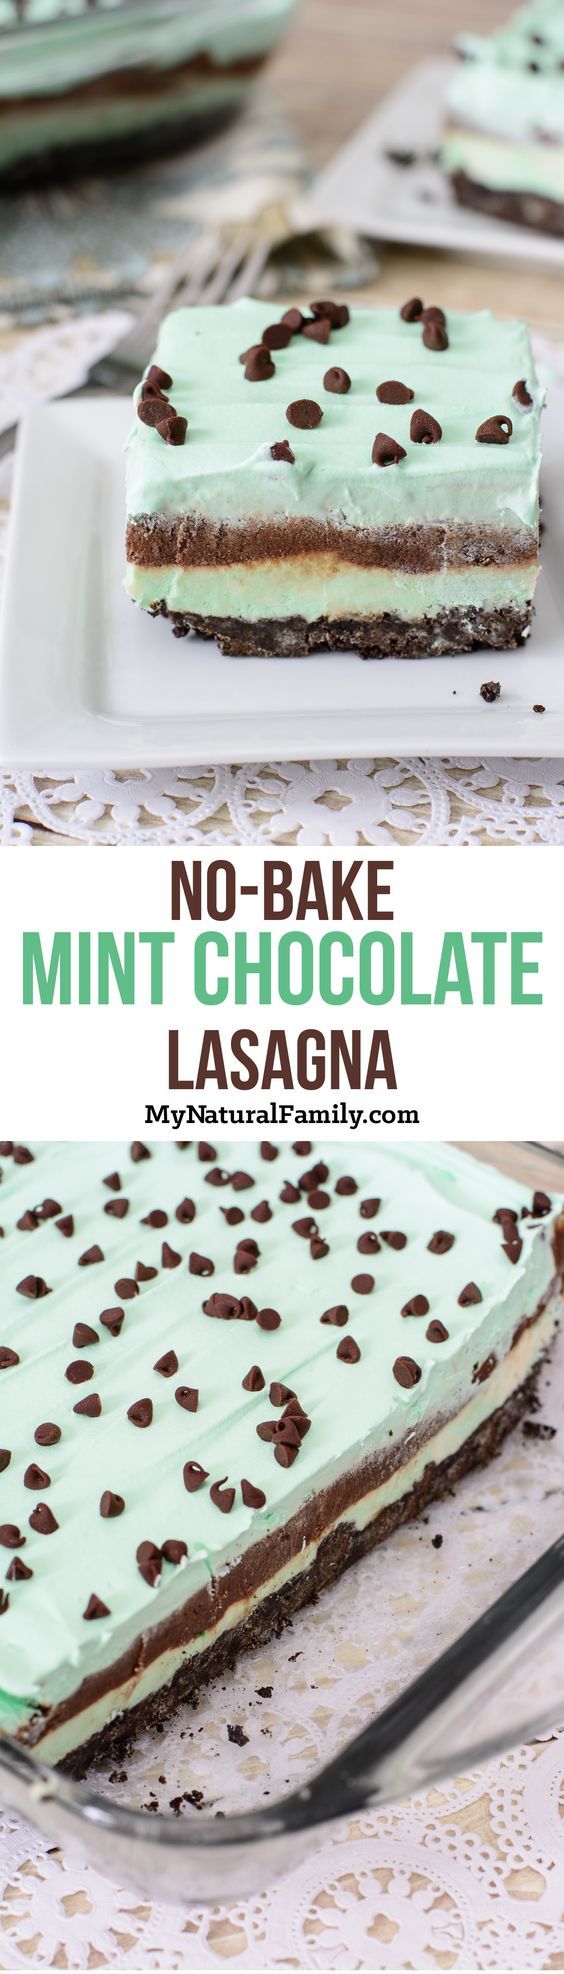 No-Bake Mint Chocolate Lasagna Dessert Recipe - I've got to try this recipe. It looks easy enough for my kids to make!